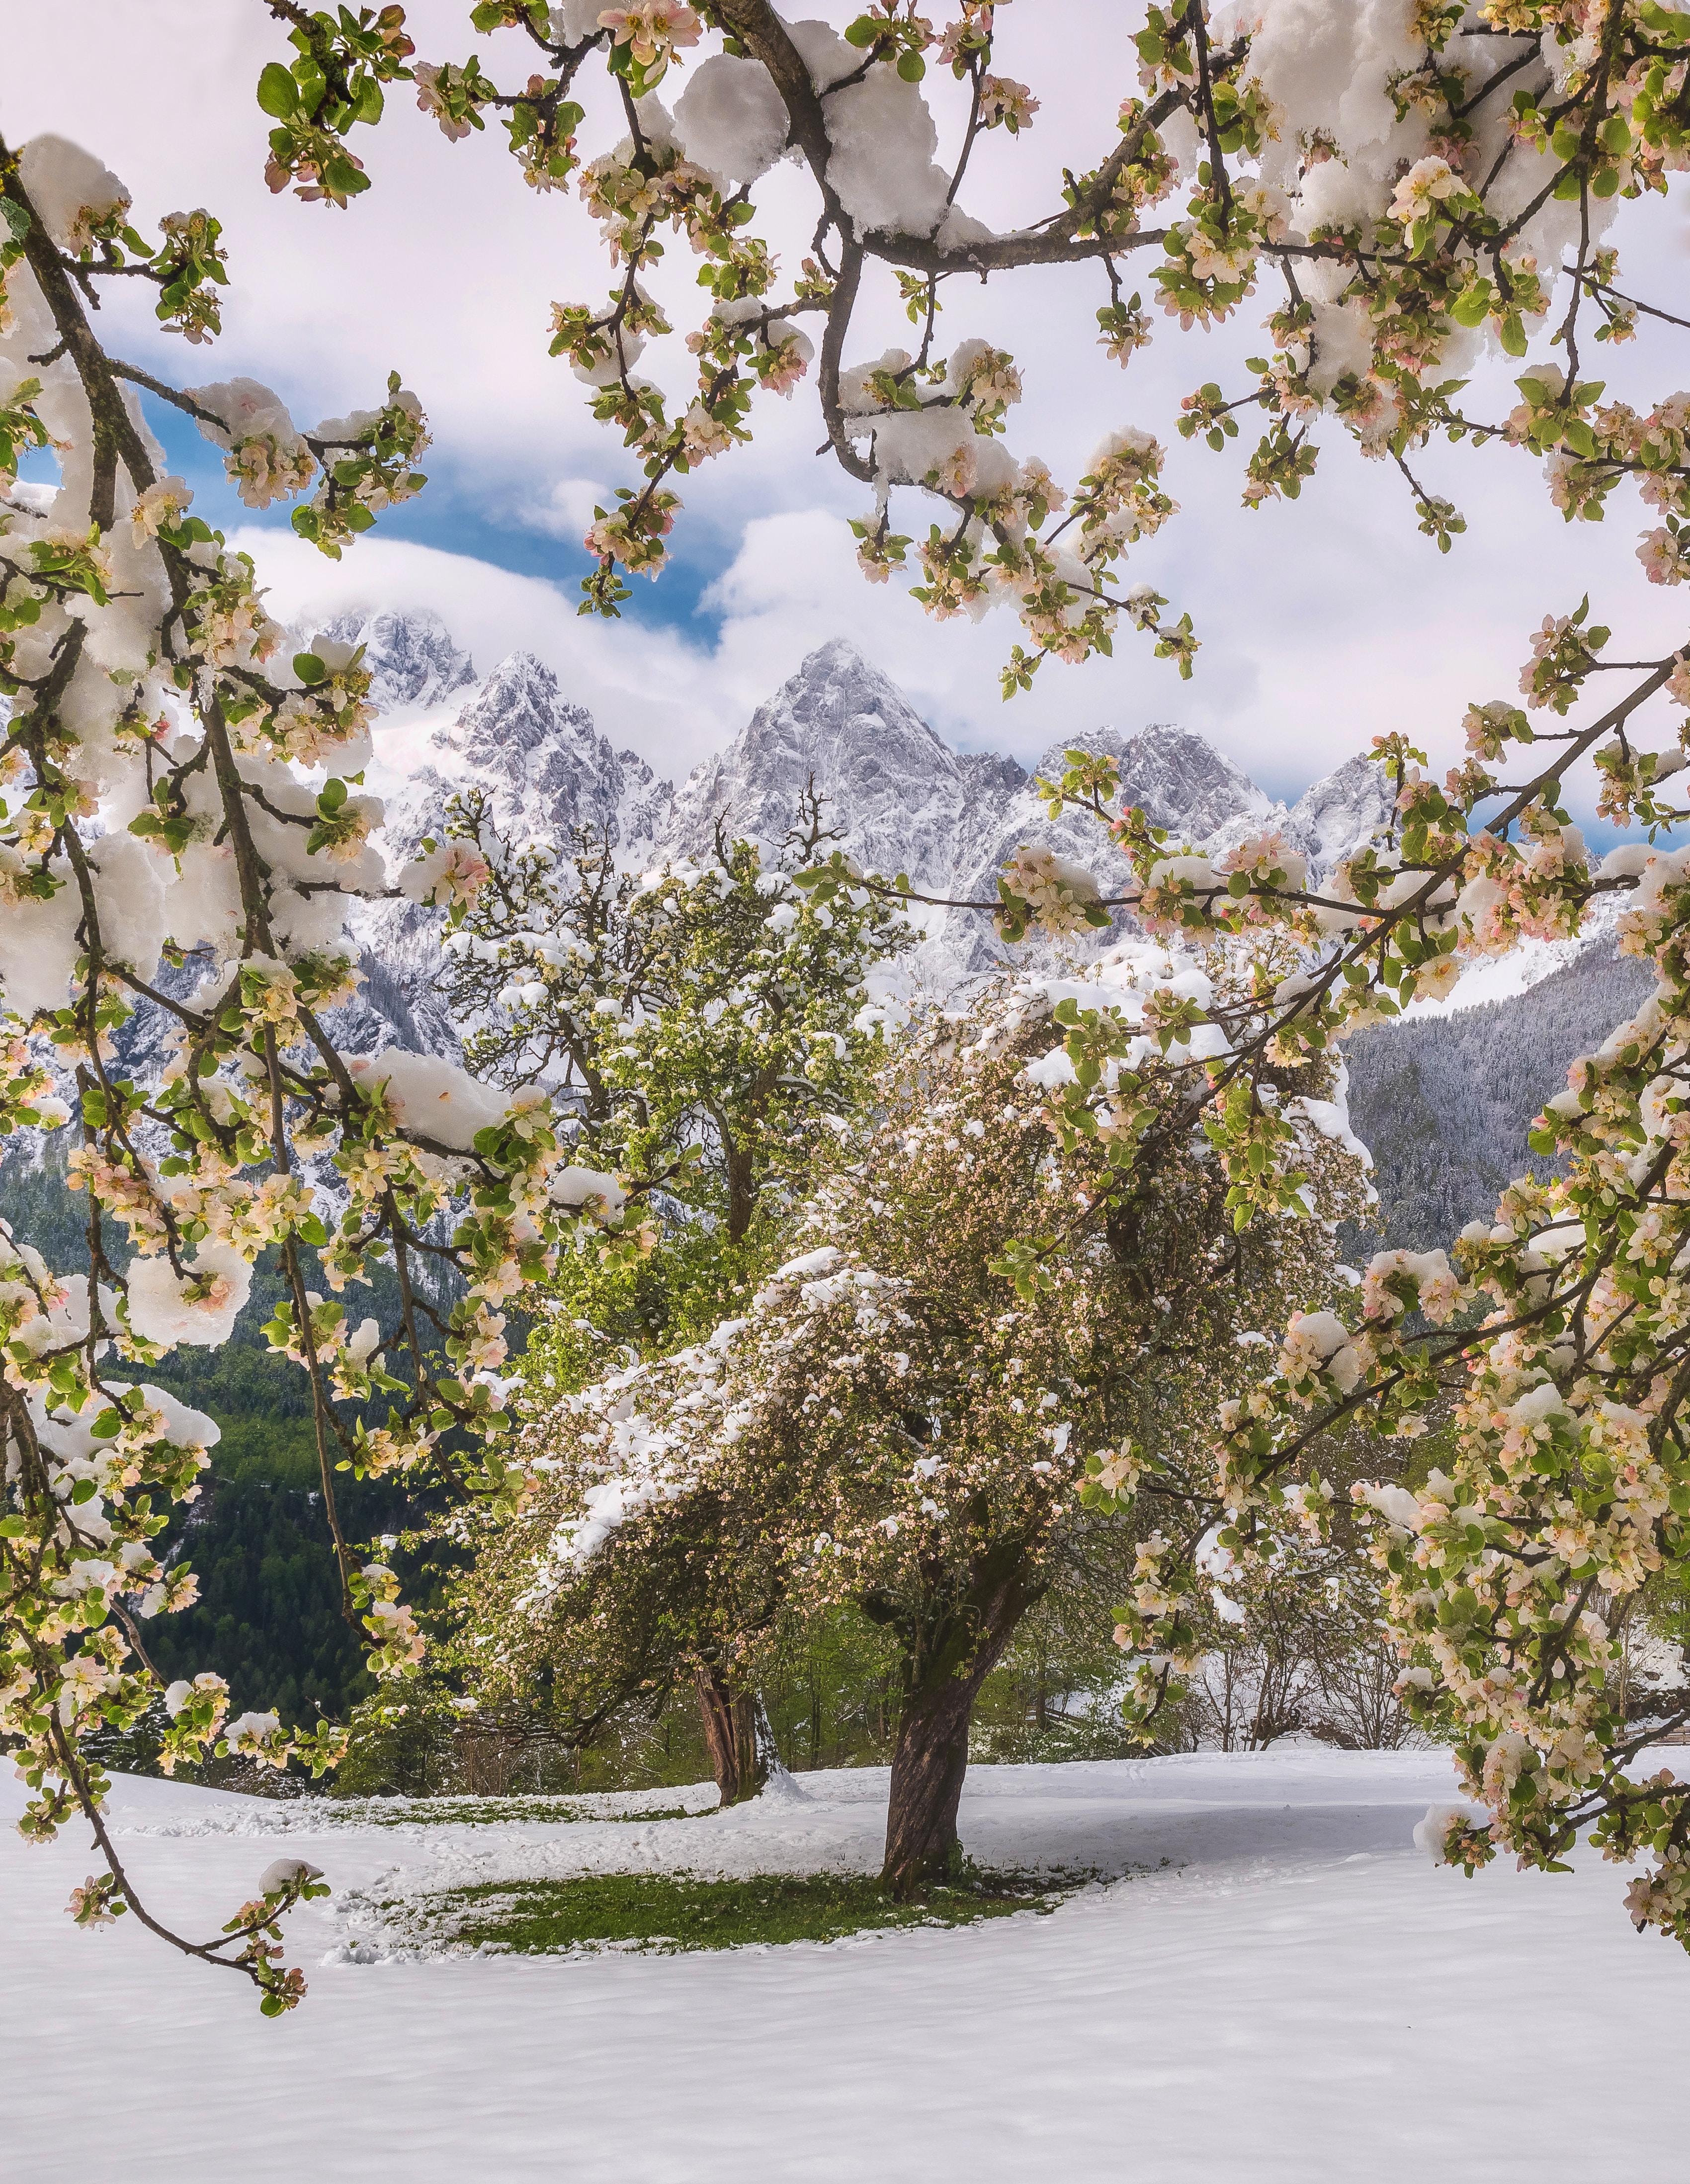 snow, snow covered, nature, flowers, trees, mountains, snowbound